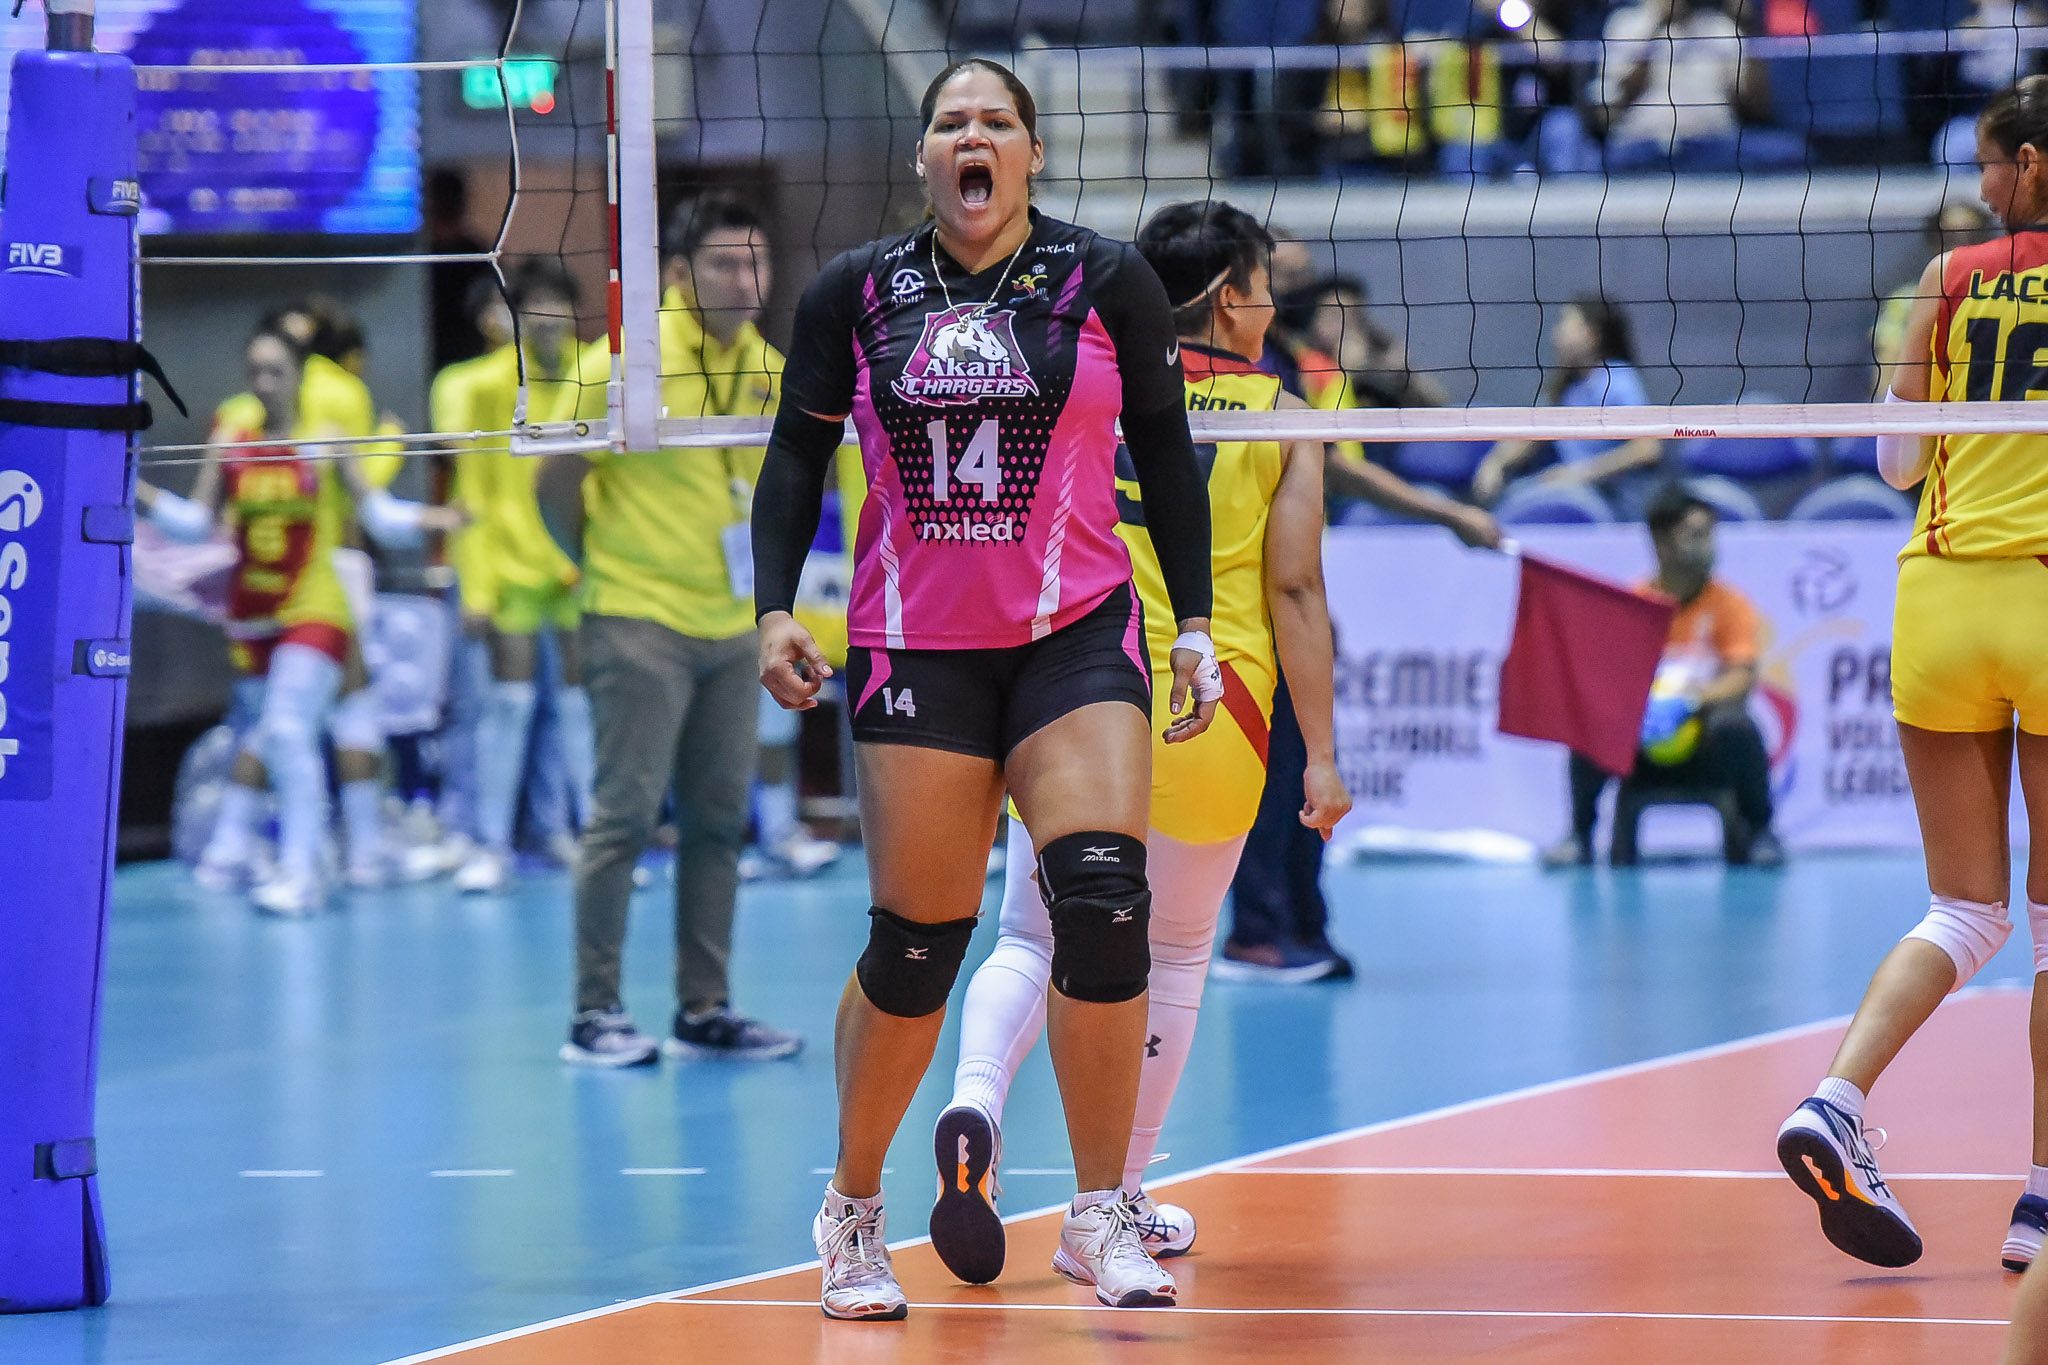 Akari ends PVL debut campaign with F2 shocker; PLDT downs Cignal to avert ouster